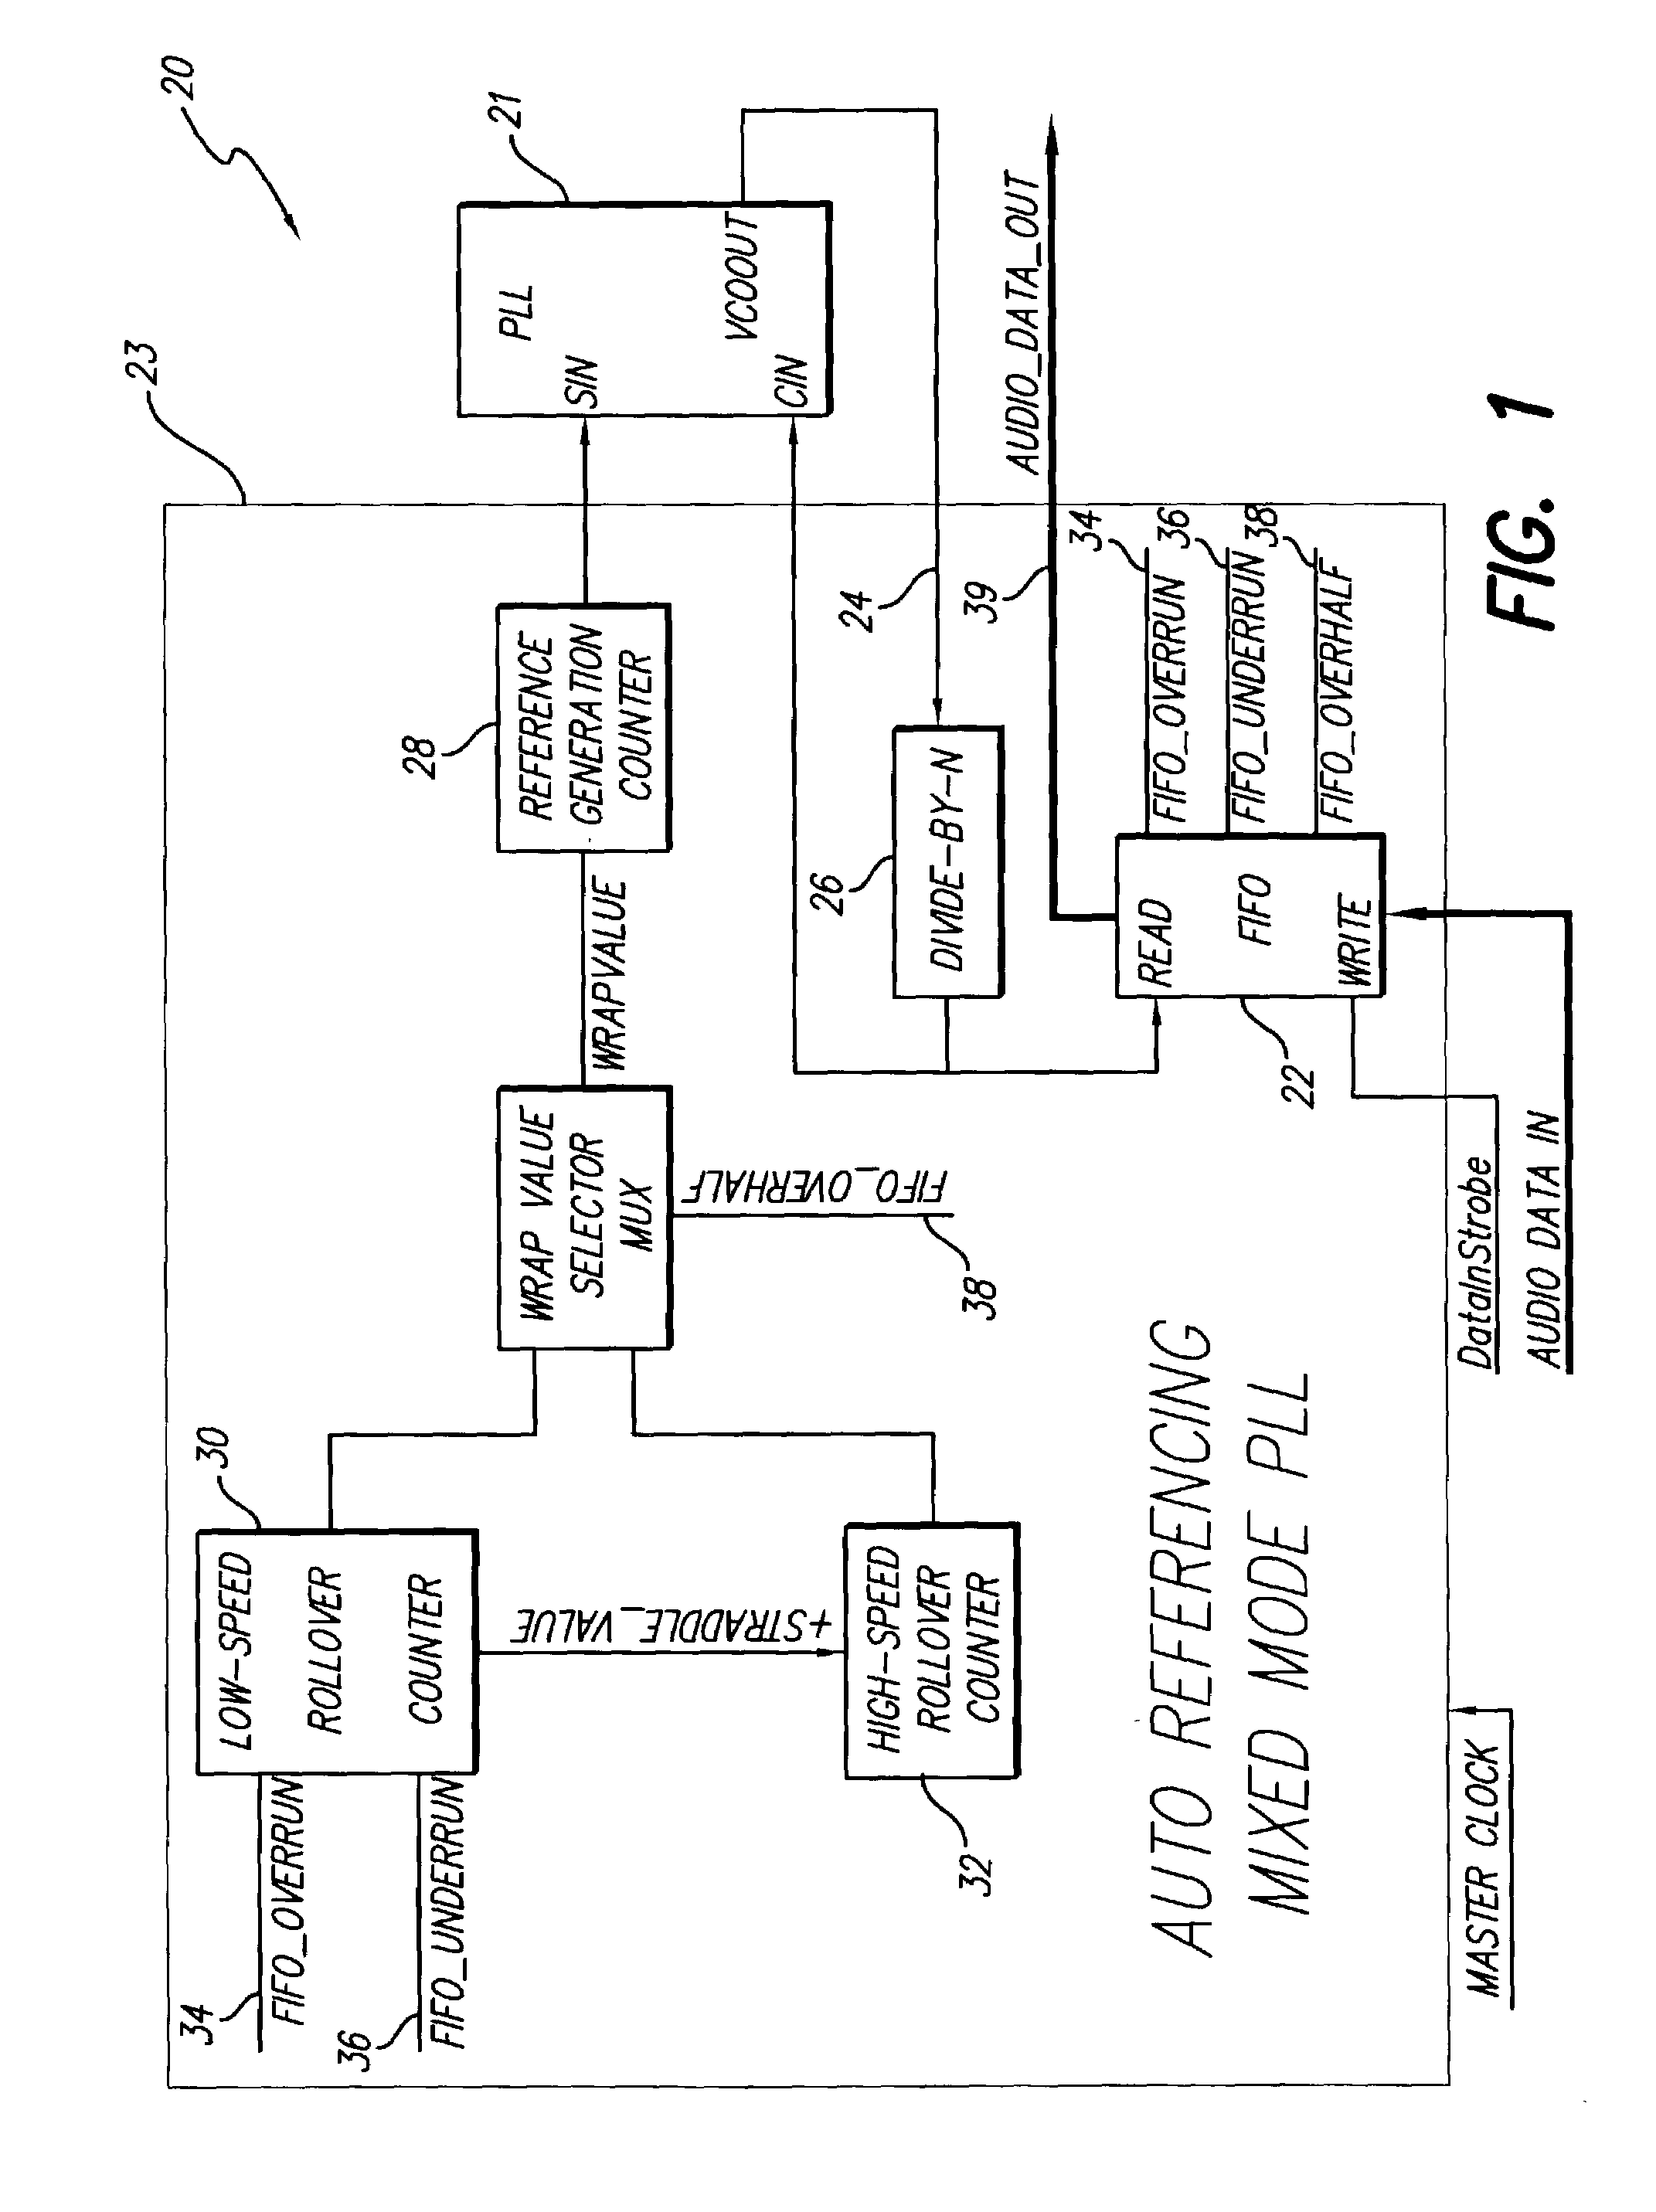 Auto-referencing mixed mode phase locked loop for audio playback applications